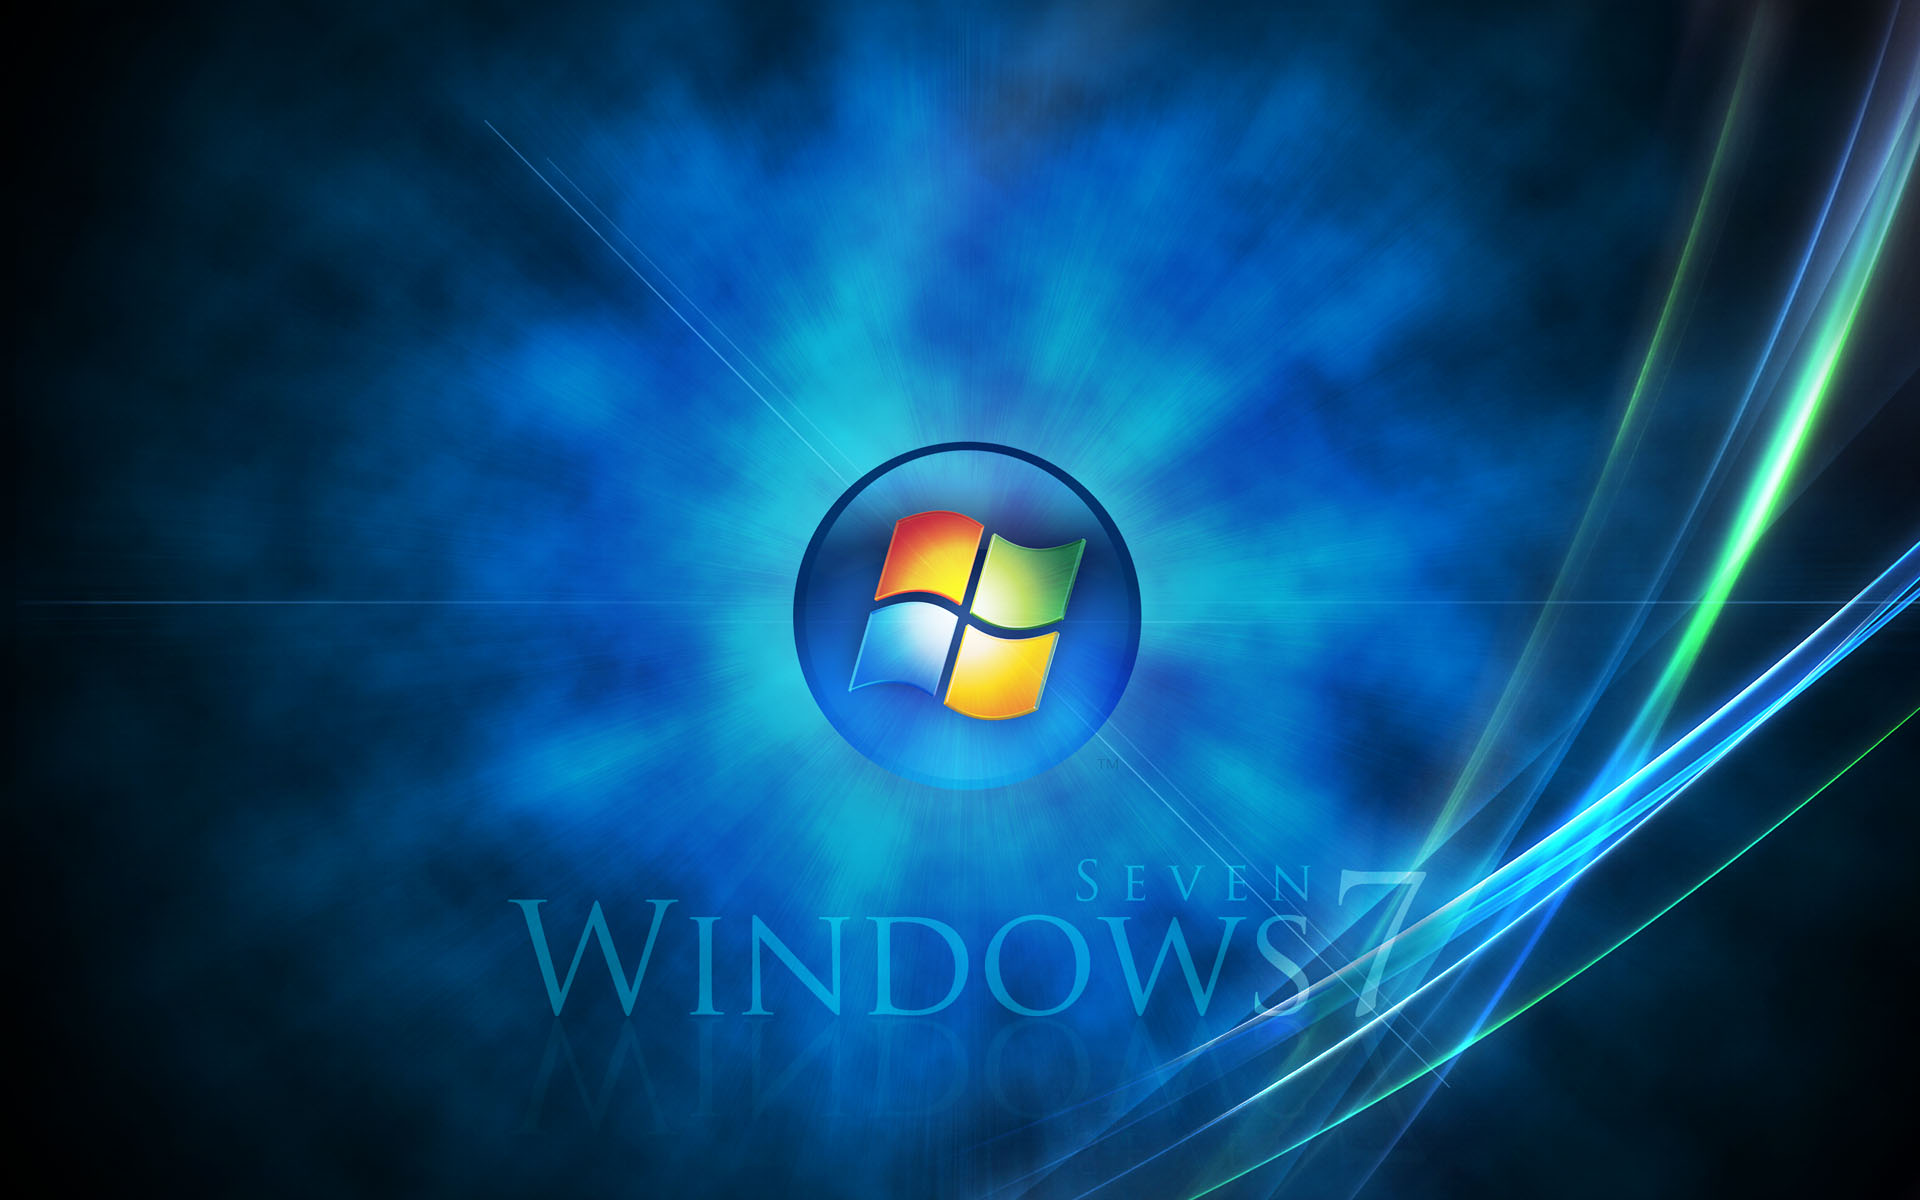 Spectacular Hq Windows Wallpaper To Spice Up Your